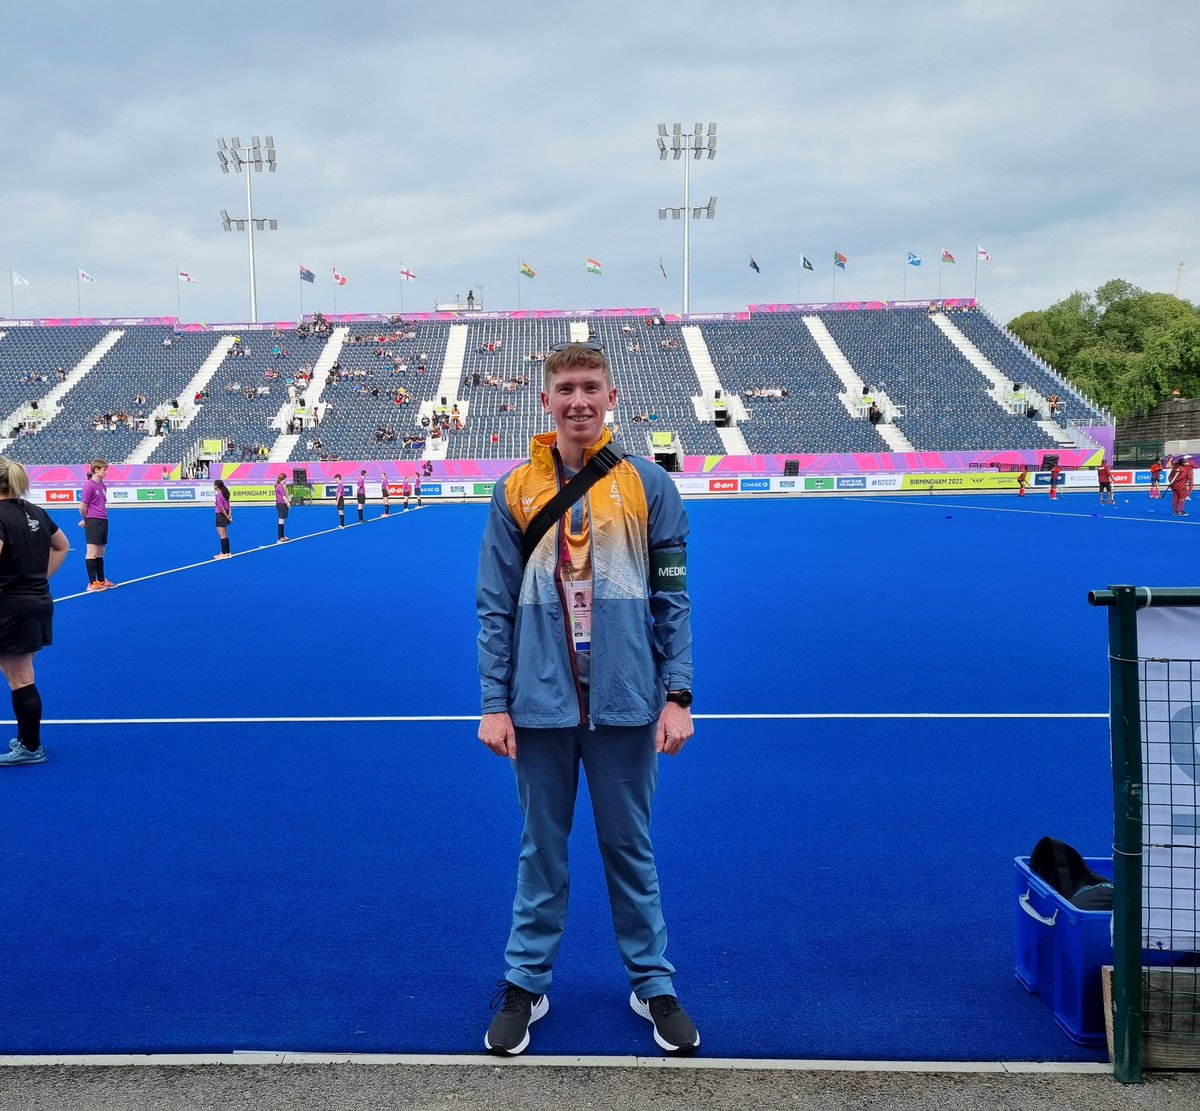 Such a privilege for me to be part of the Athlete Medical Services at the Birmingham 2022 Commonwealth Games this year 🌍. A busy first hockey shift today, but loved every minute working with a great MDT. Bring in the next 10 days of action! #CommenwealthGames #Birmingham2022